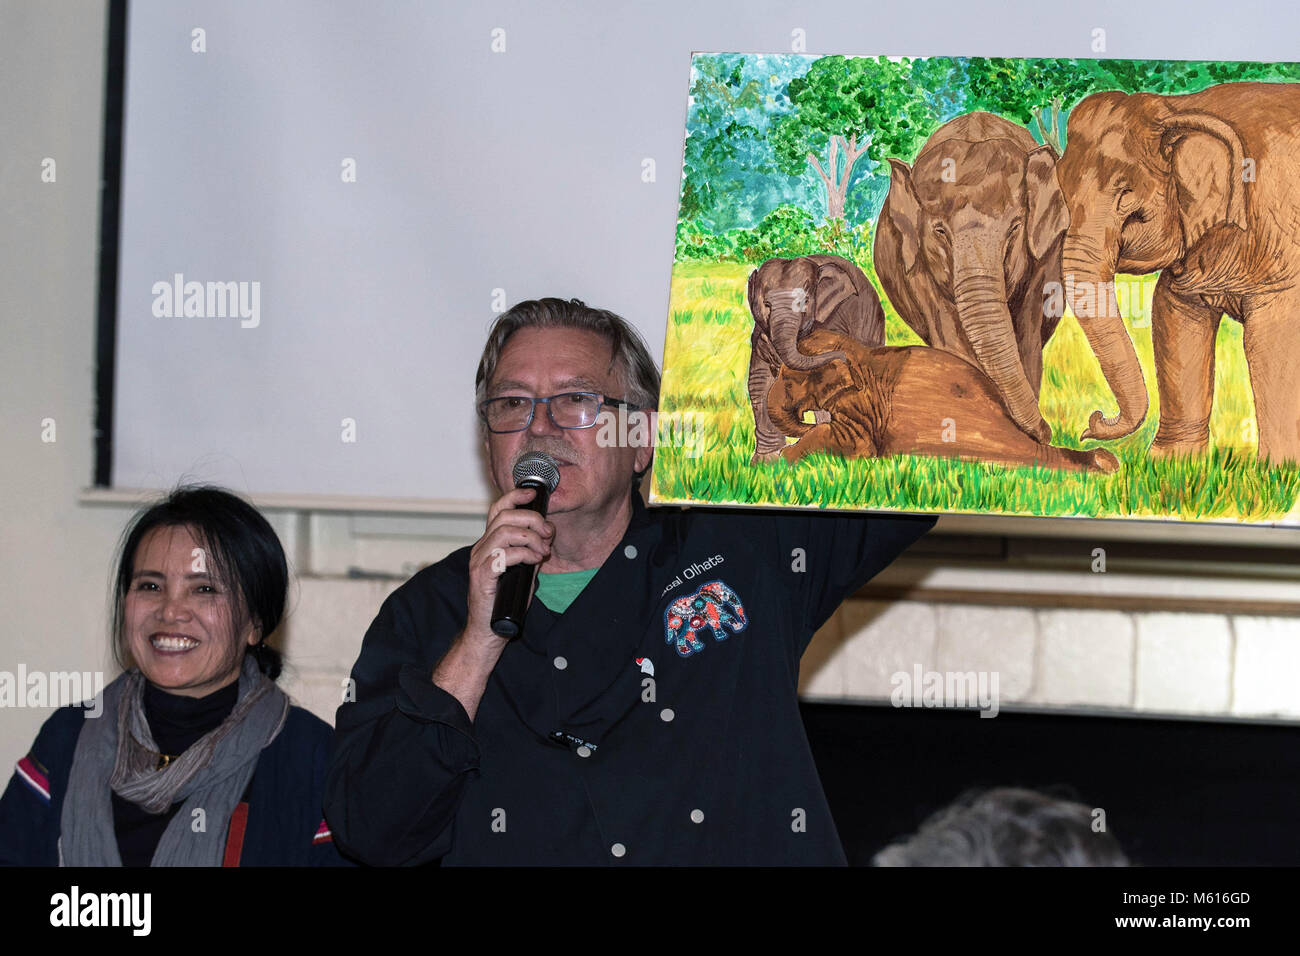 Corona del Mar, California, USA. 25th Feb, 2018. 'The Gray Event' is an evening of food, wine and entertainment to raise funds and shine a light on a little-known issue that is near and dear to Chef Pascal's heart: preventing the abuse of Asian elephants. Pictured: Co-founder of Elephant Nature Park and rescue center of elephants in Northern Thailand, Sangduen 'Lek' Chailert and Chef Pascal on the action for fundraising money to save elephants. Credit: Katrina Kochneva /ZUMA Wire/Alamy Live News Stock Photo